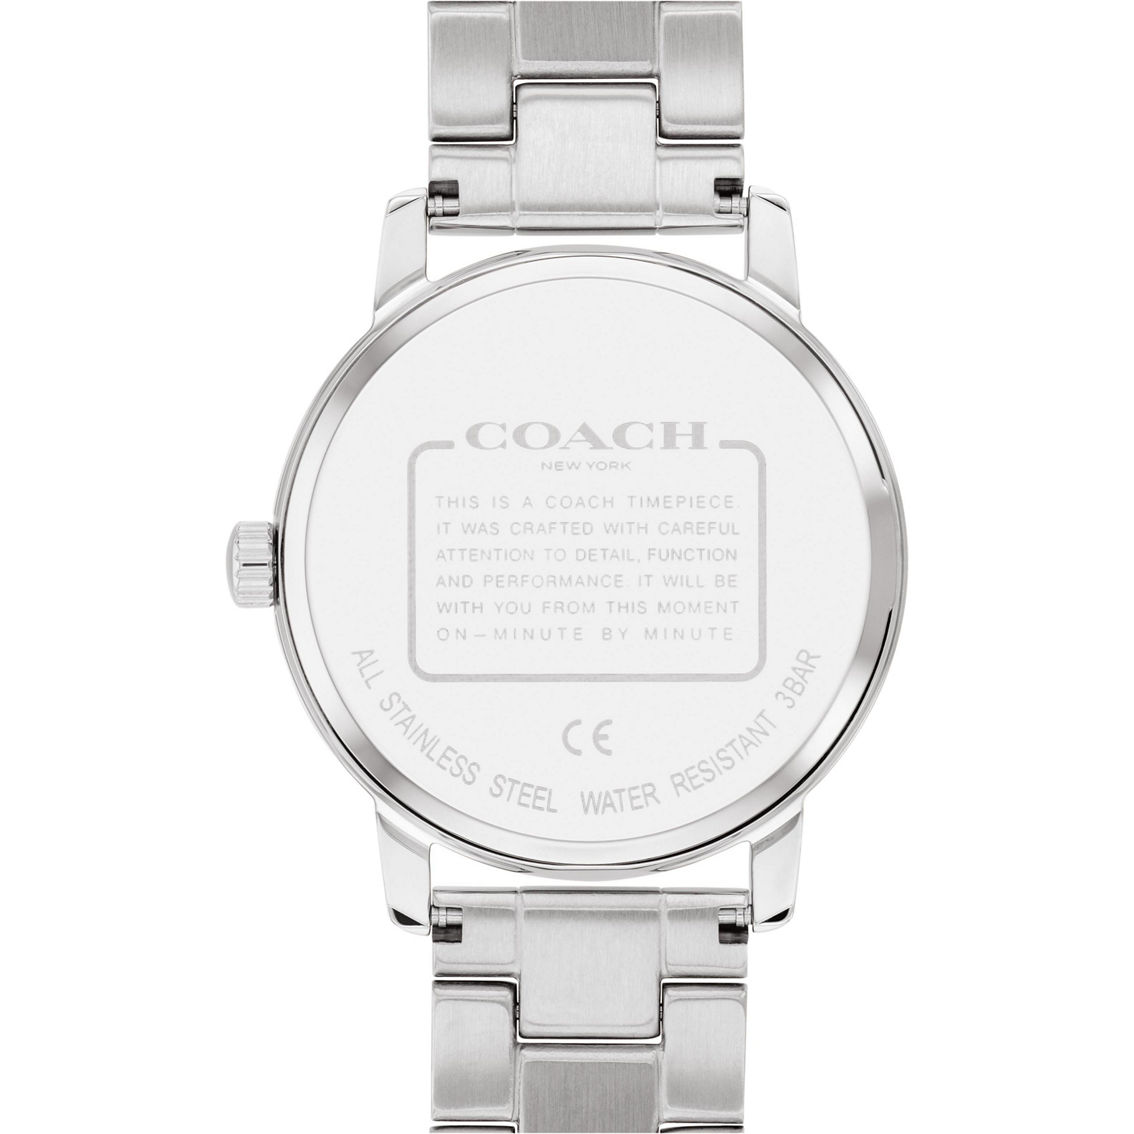 COACH Ladies Grand Stainless Steel Watch 14503943 - Image 2 of 3